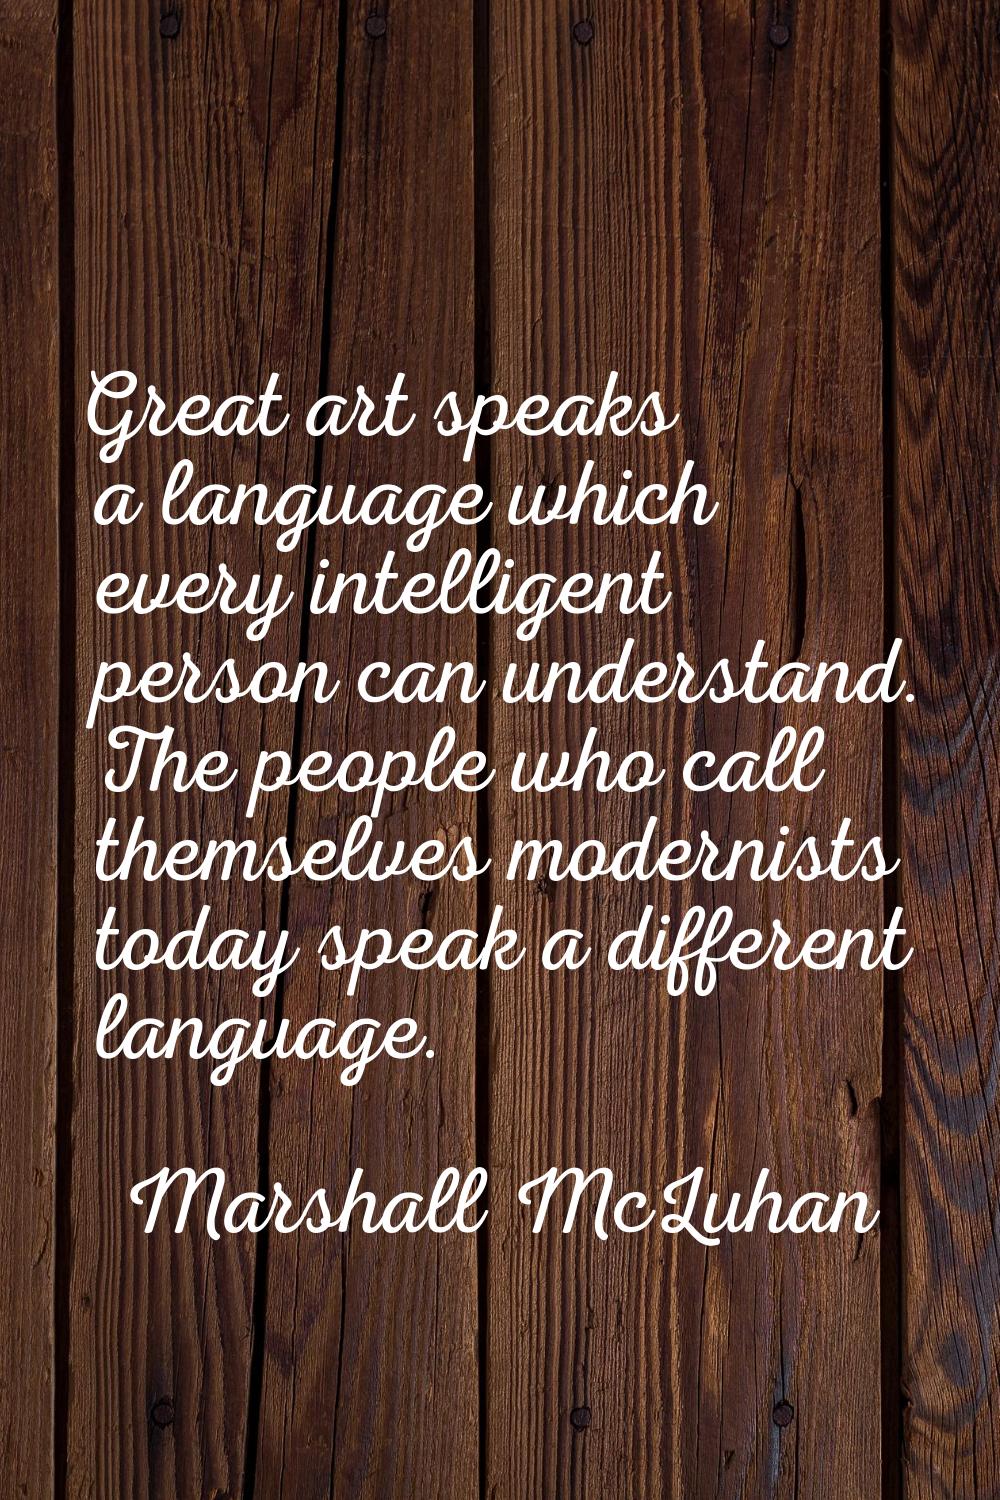 Great art speaks a language which every intelligent person can understand. The people who call them